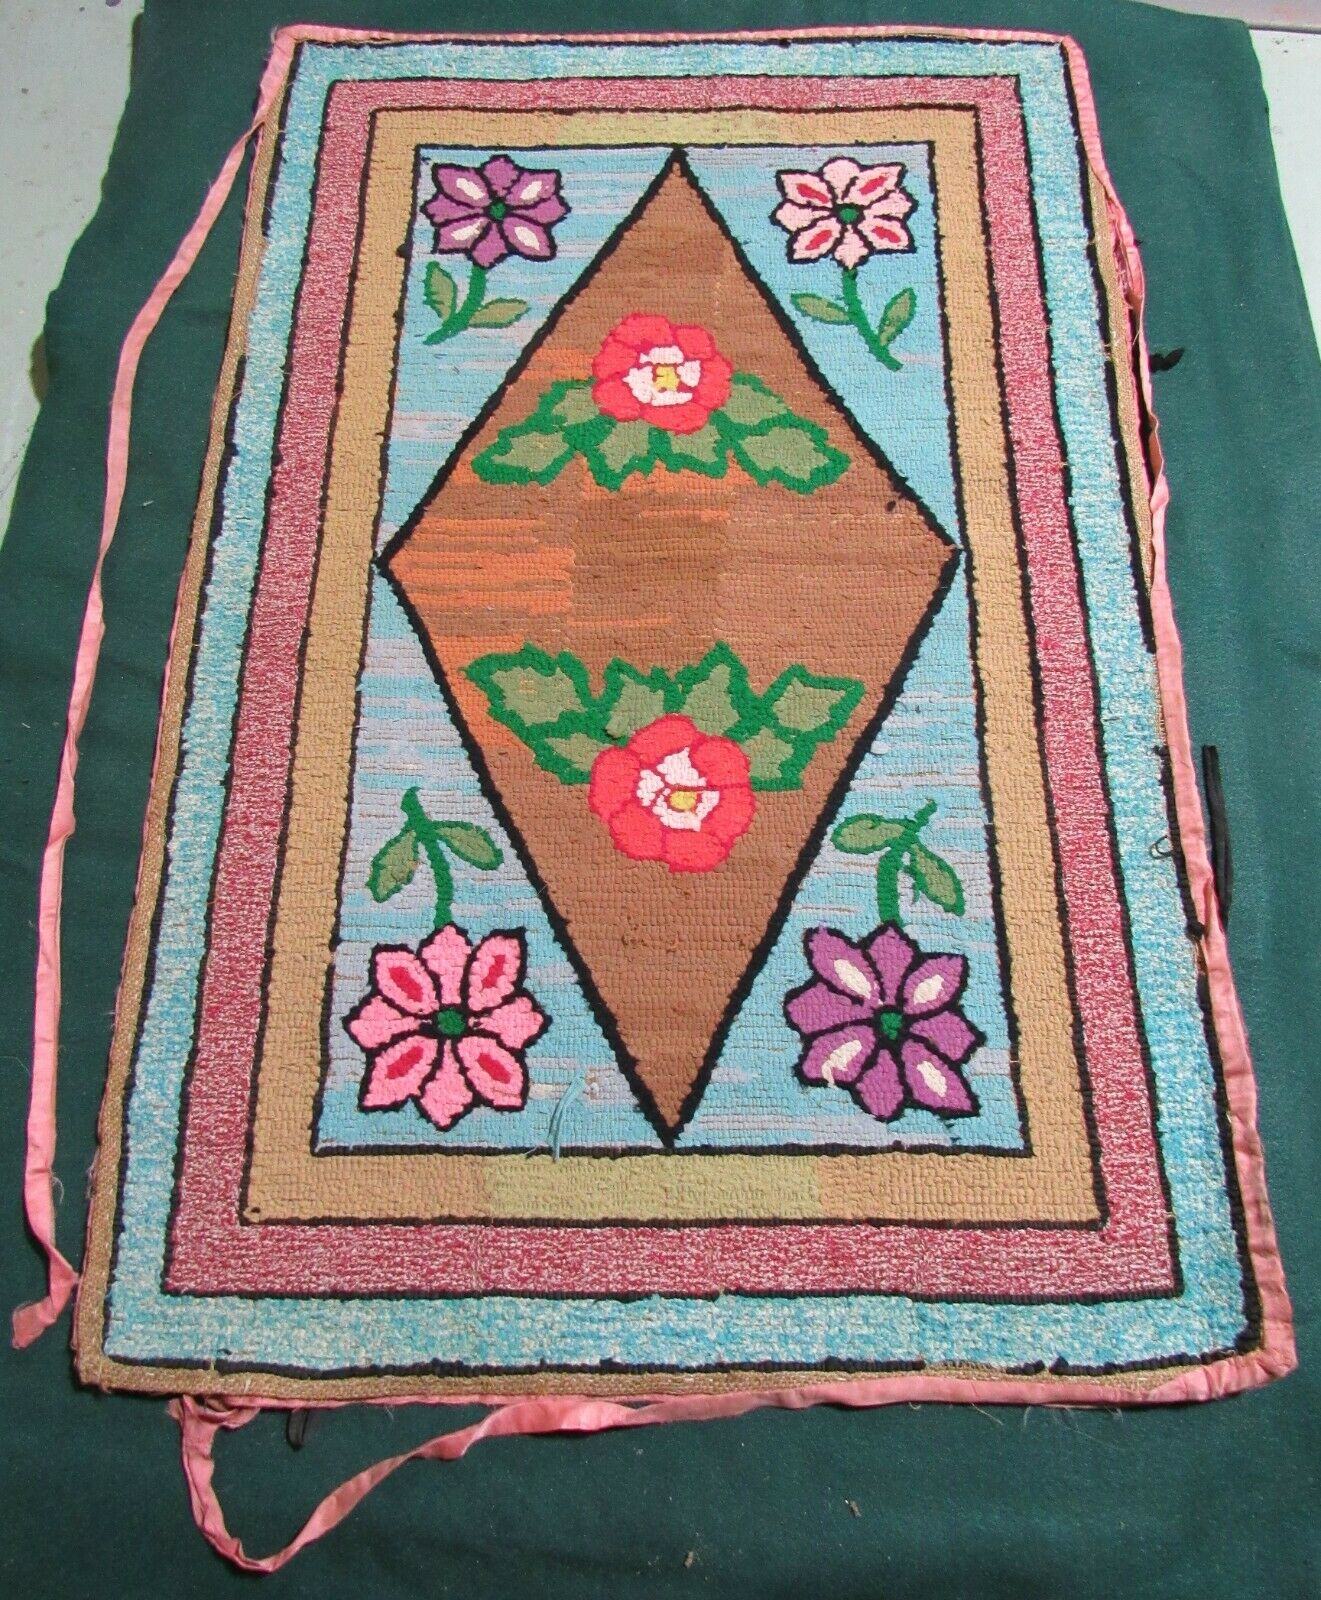 Antique Handmade Wool Hooked Rug, 41 X 26 Inches, Floral Geometric Pattern